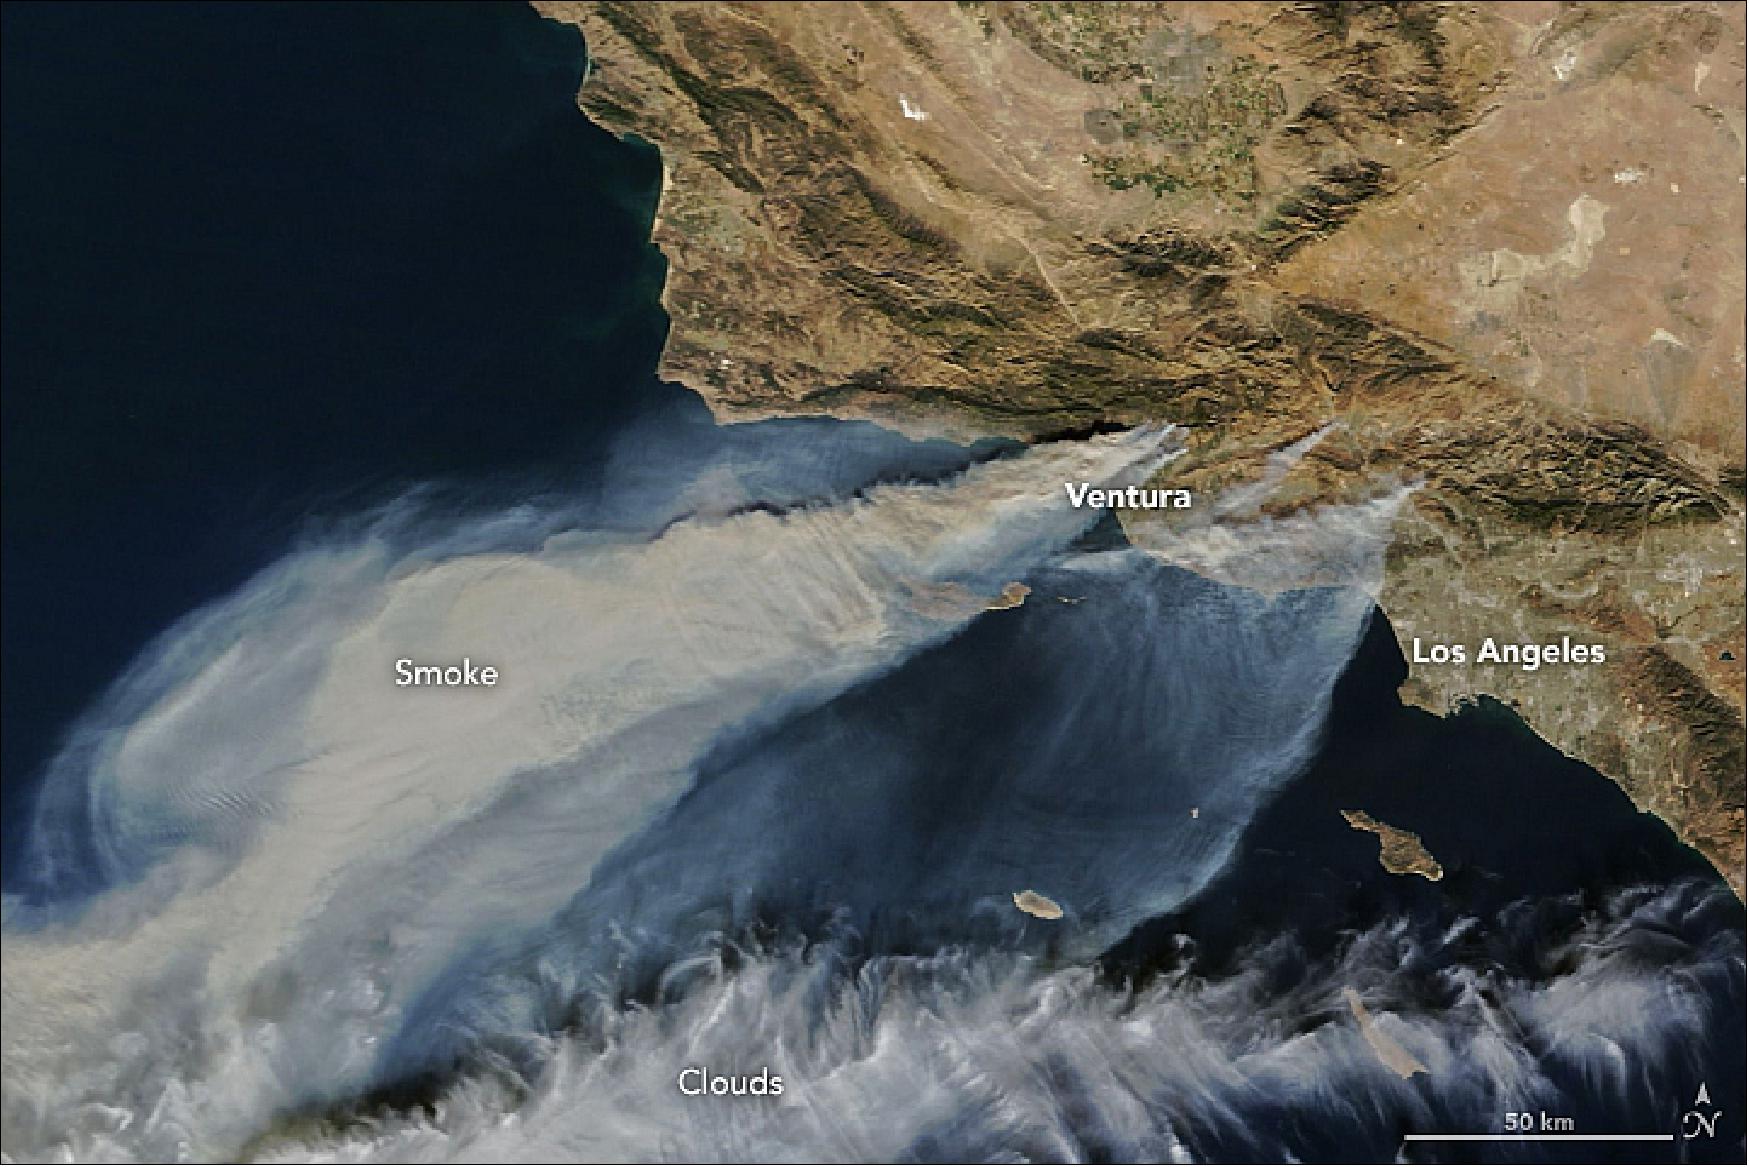 Figure 51: MODIS image of the Ventura County fire acquired on 5 Dec. 2017 (image credit: NASA Earth Observatory, images by Joshua Stevens, using MODIS data from LANCE/EOSDIS Rapid Response, story by Adam Voiland)